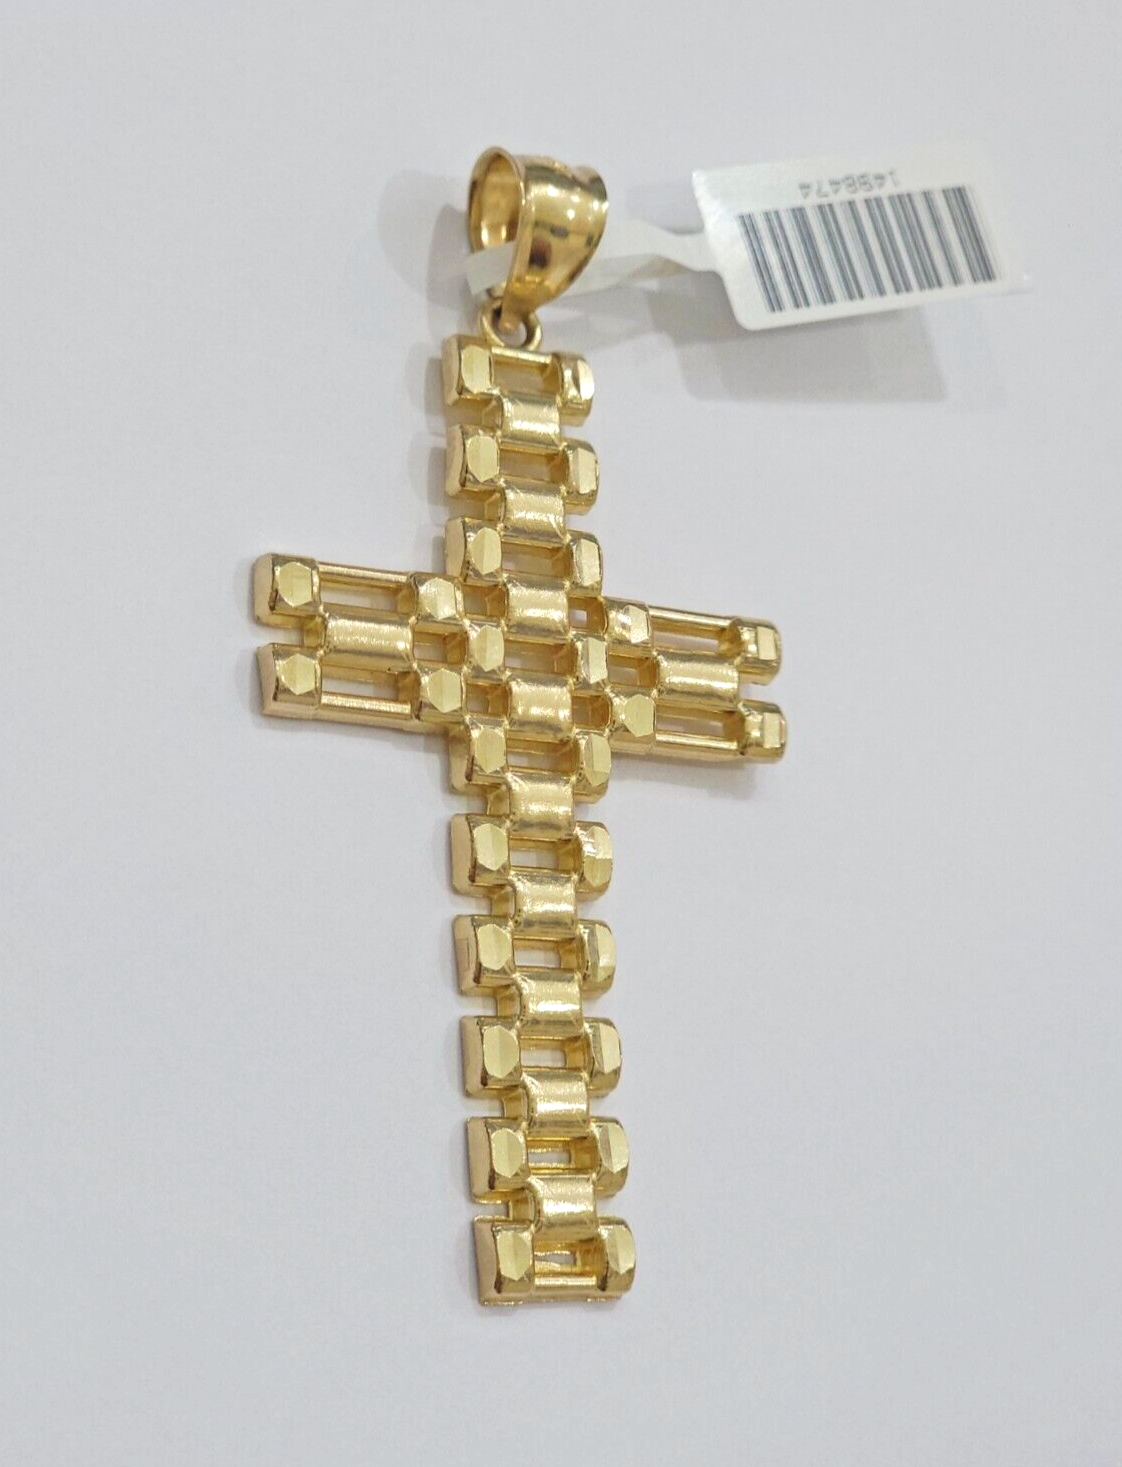 10K Yellow Gold Cross Pendant Mens Jesus Crucifix Charm 2.8 Inch For Thick Chain